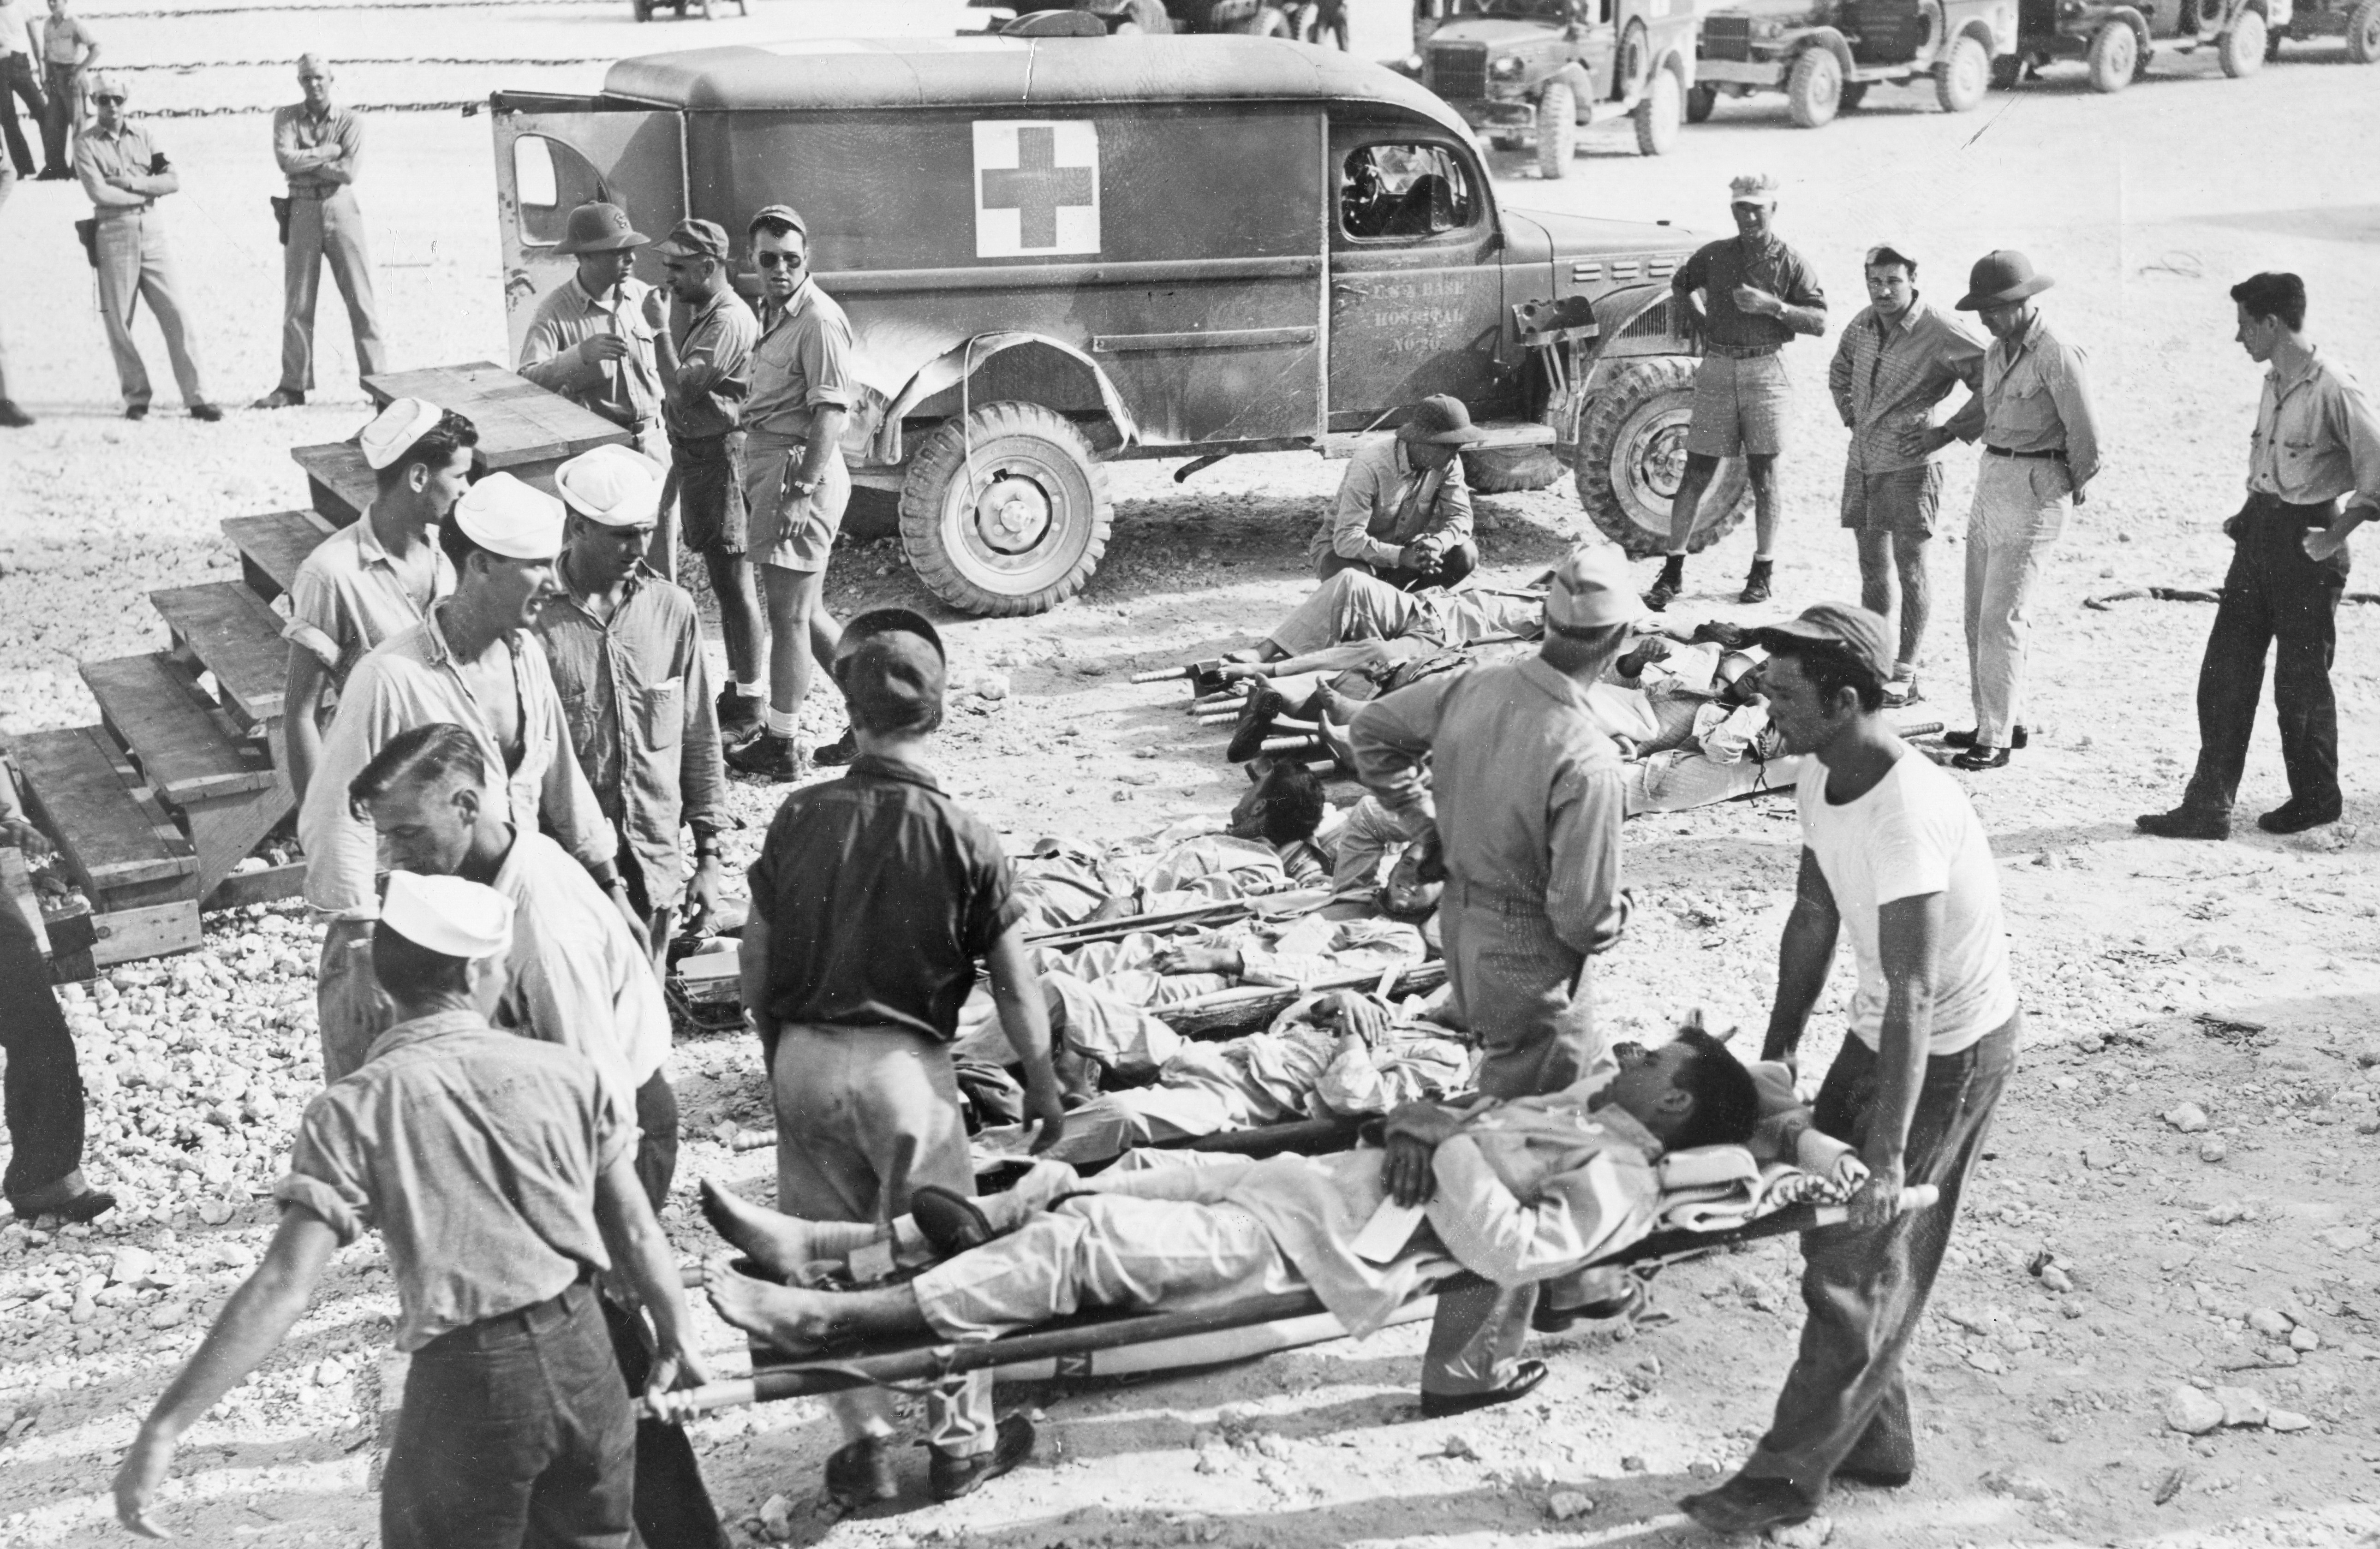 black and white scene with USS Indianapolis survivors on stretchers with an ambulance in the background